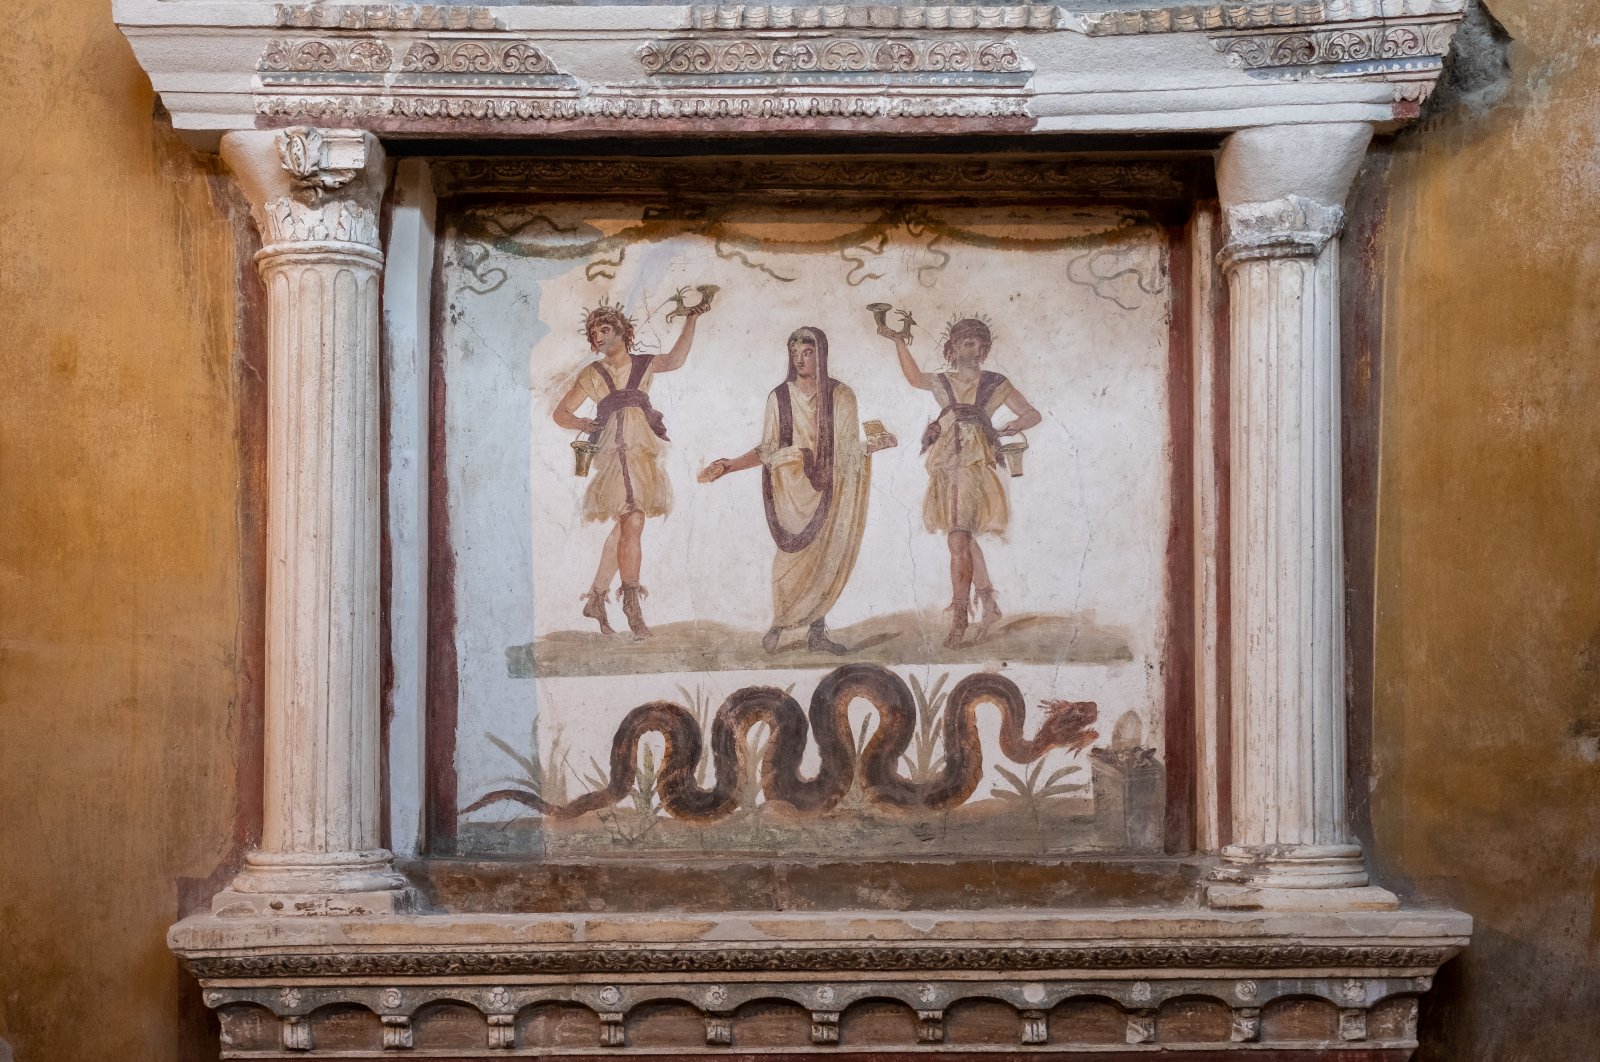 The Hall of Pentheus, a fresco depicts Hercules as a child, crushing two snakes at the Casa dei Vettii which has been reopened to the public after 20 years at the archaeological site of the ancient Roman city of Pompeii, Campania region, Italy, Jan. 10, 2023. (AA Photo) 